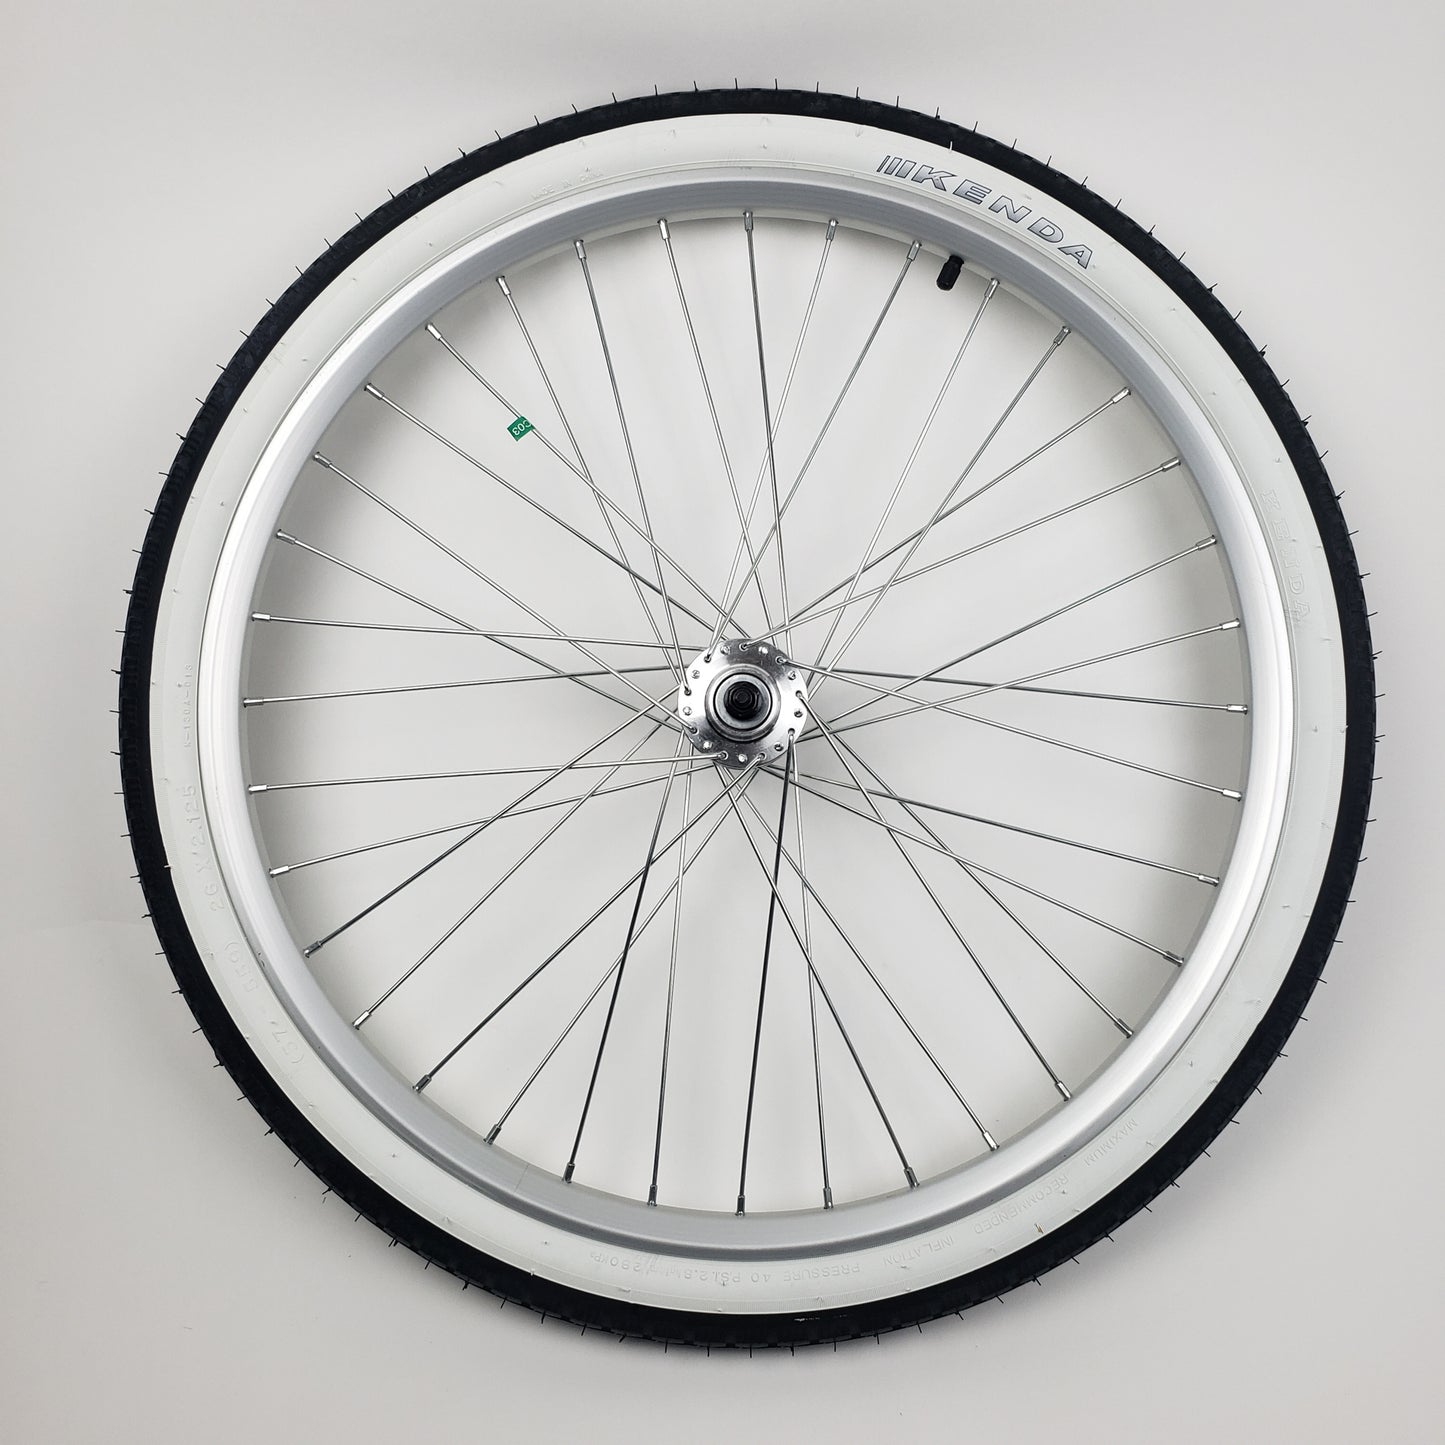 Cruiser Bike Front Wheel with Tire